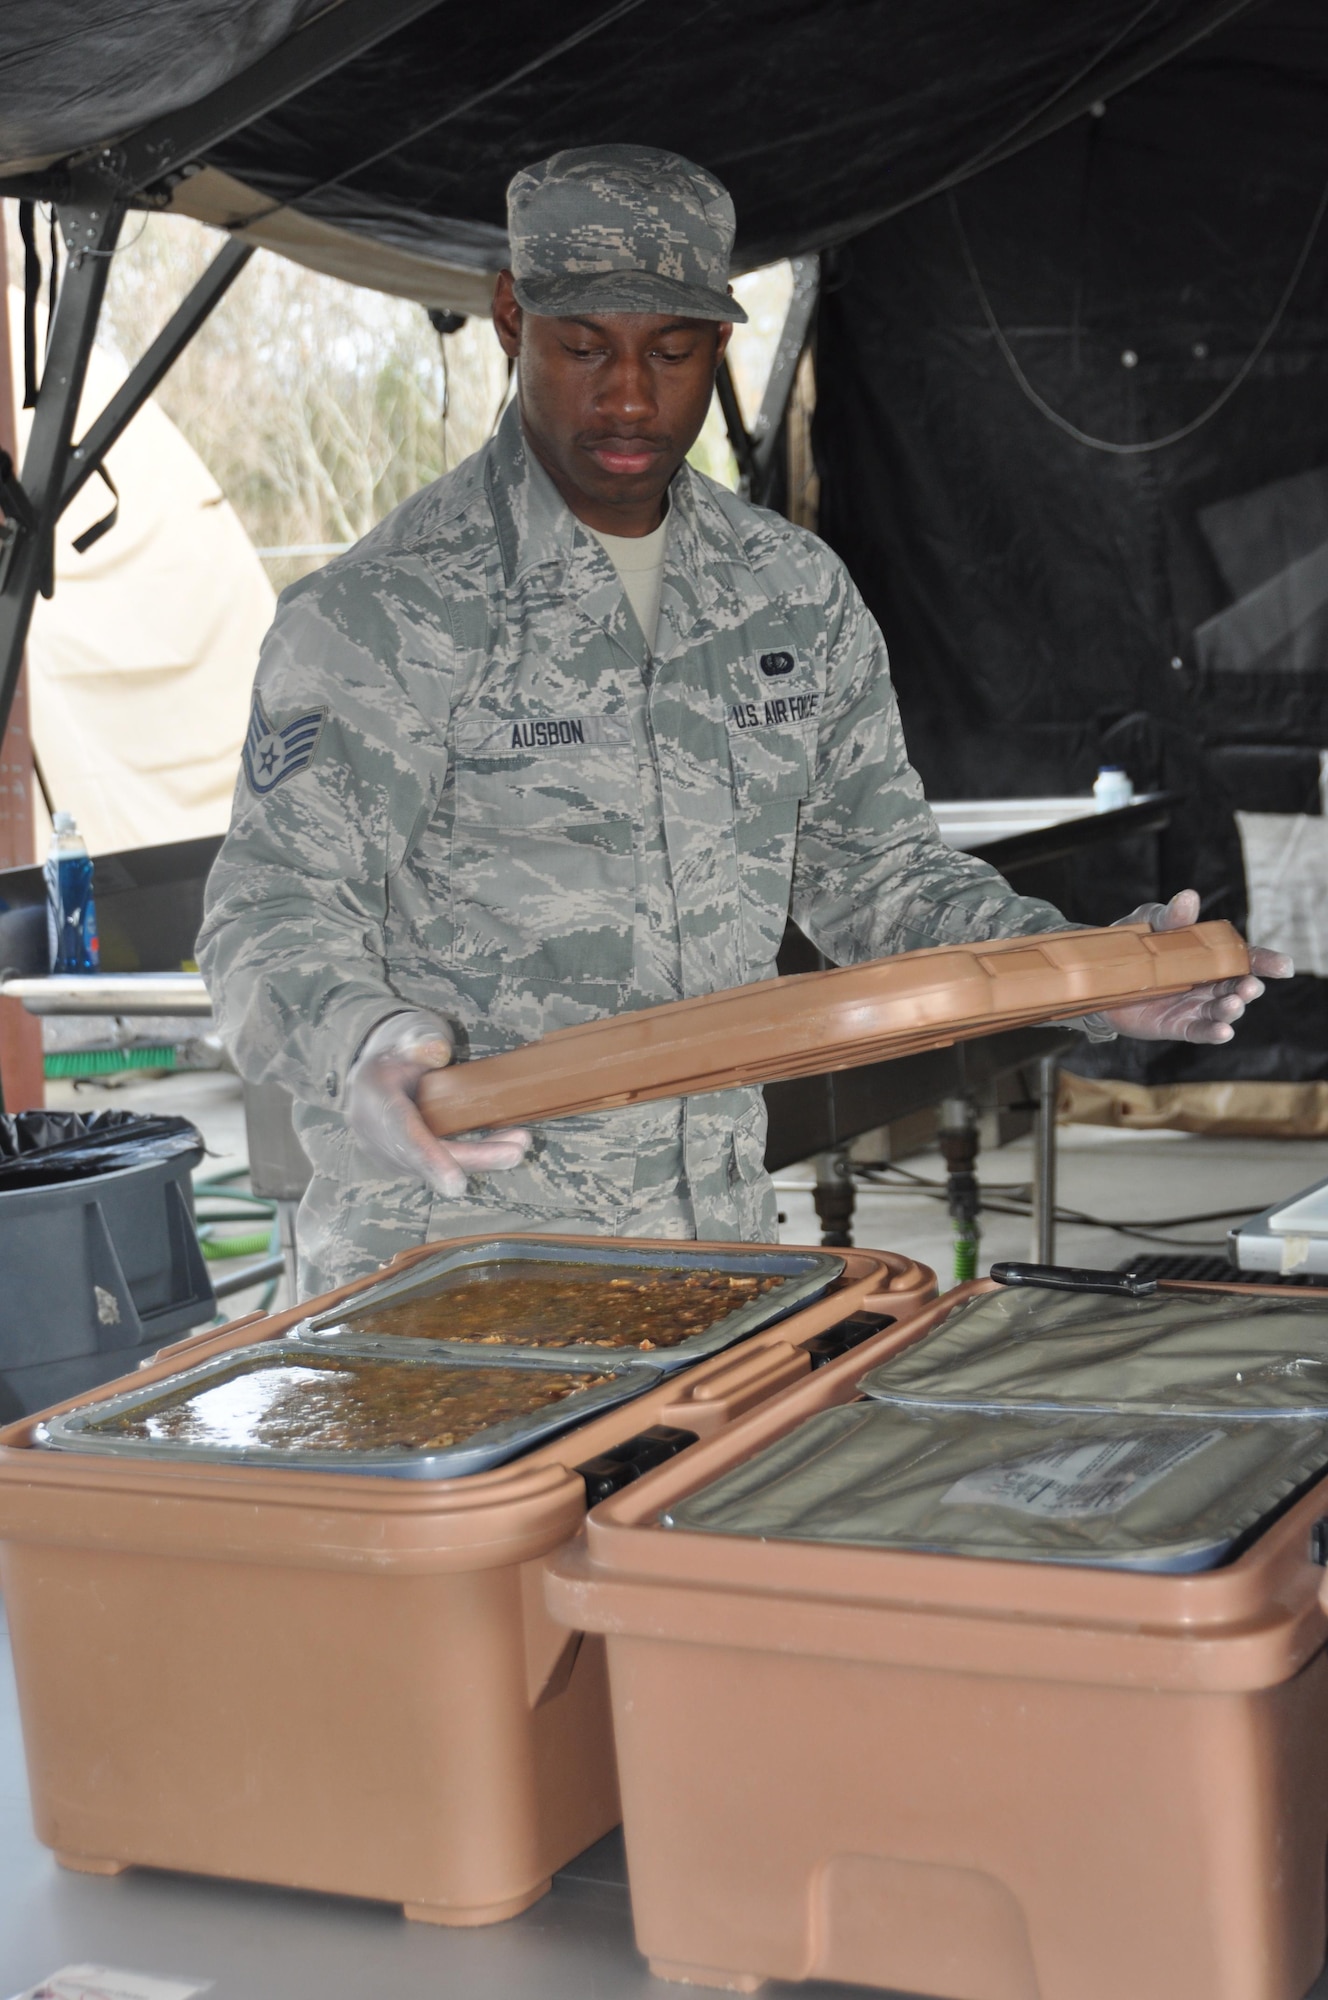 Staff Sgt. Octavius Ausbon, member of the 908th Airlift Wing’s Force Support Squadron, prepares to cover food during the Hennessy Competition Feb. 11 at Maxwell Air Force Base. Ausbon won the individual Outstanding Performer award last year while competing for the John L. Hennessy Award that recognizes those who best excel in food service. (U.S. Air Force photo by Bradley J. Clark